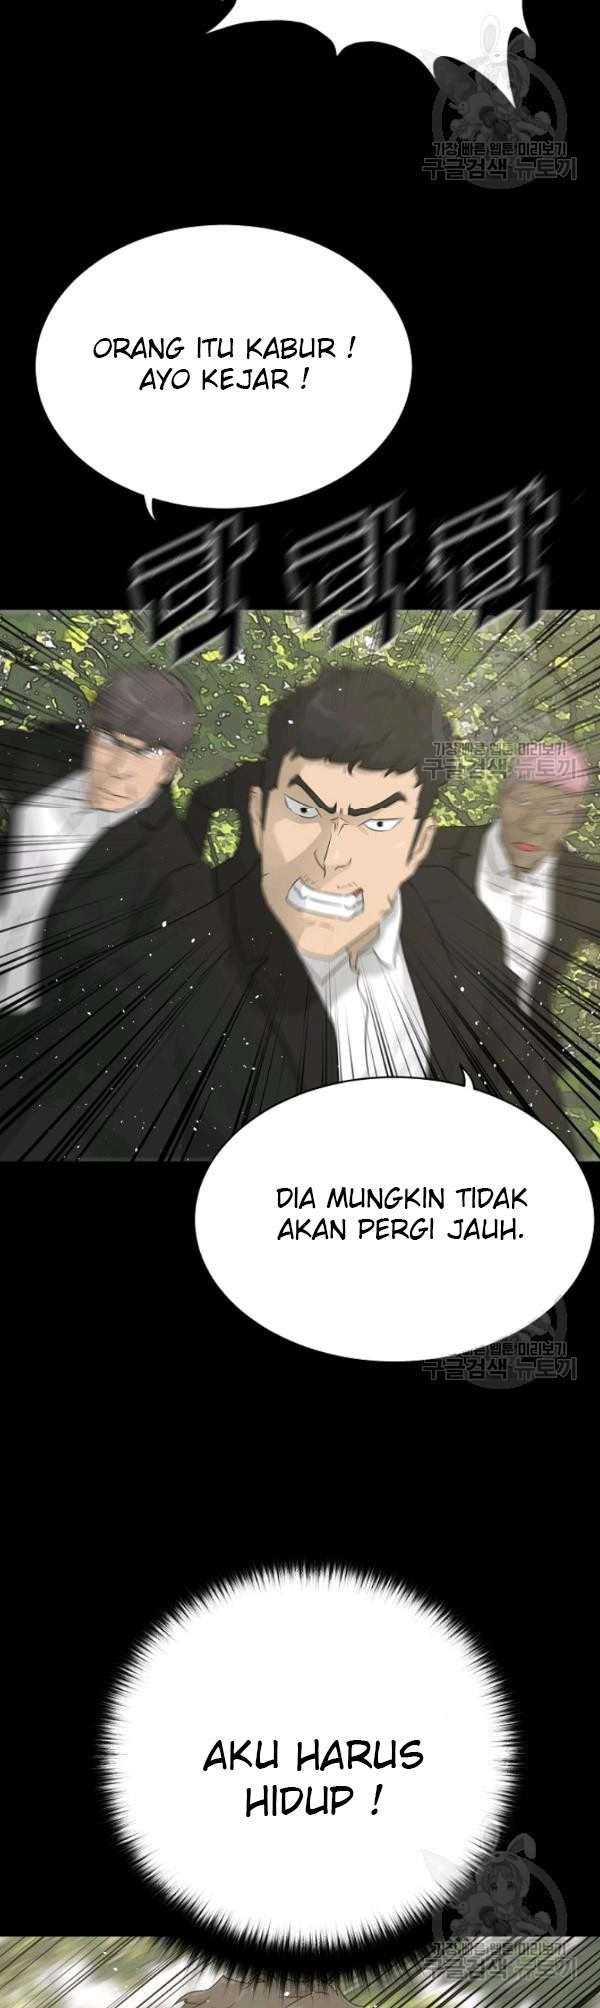 Trigger Chapter 69